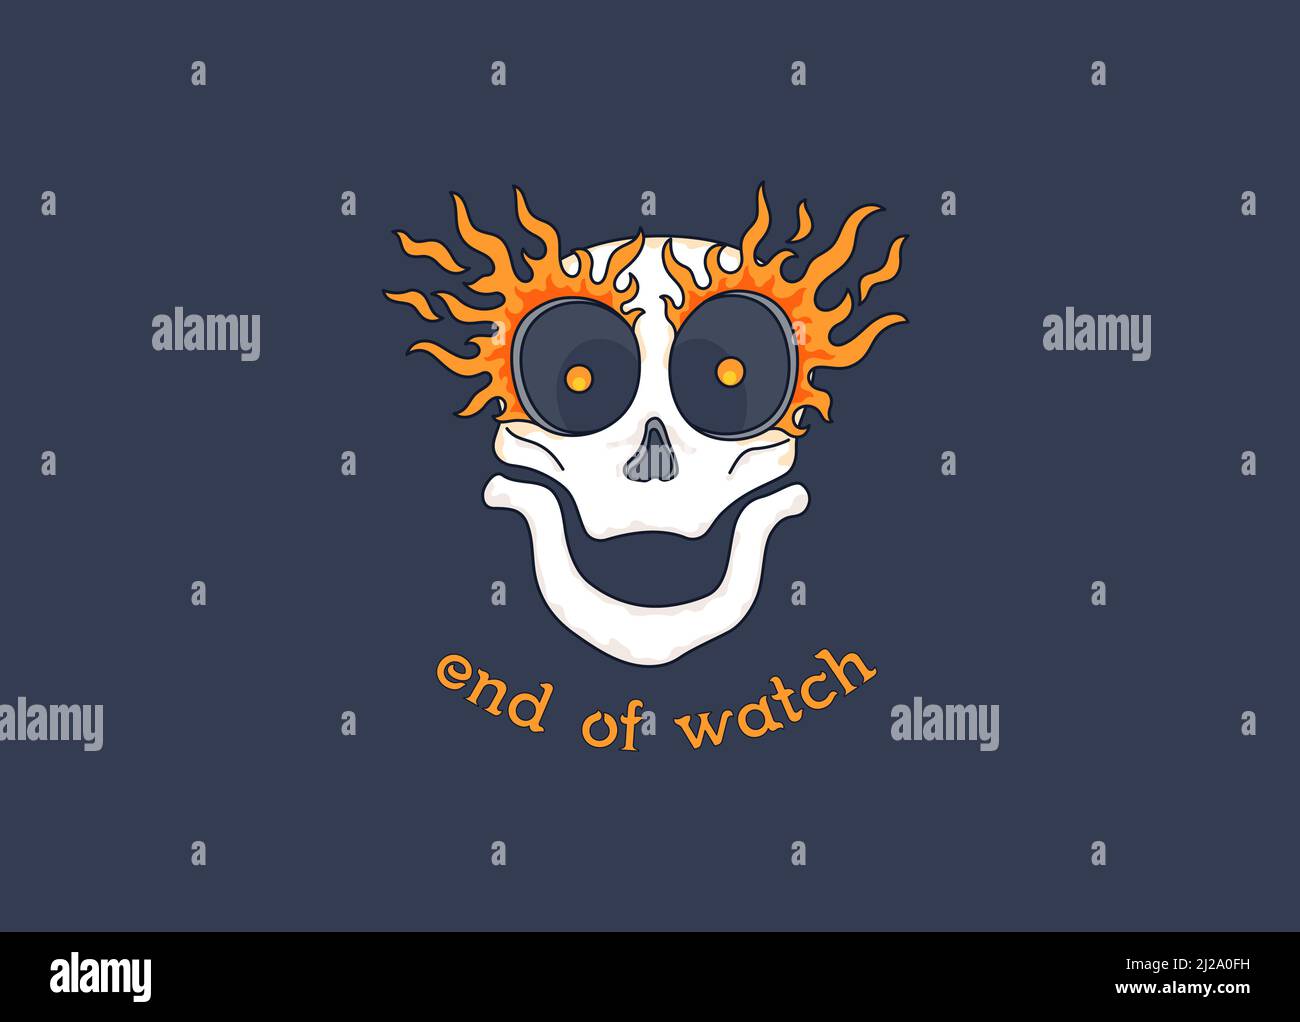 Cheerful cartoon skull on fire with a motivational slogan. Burning skull. End of watch. Vector graphics Stock Vector